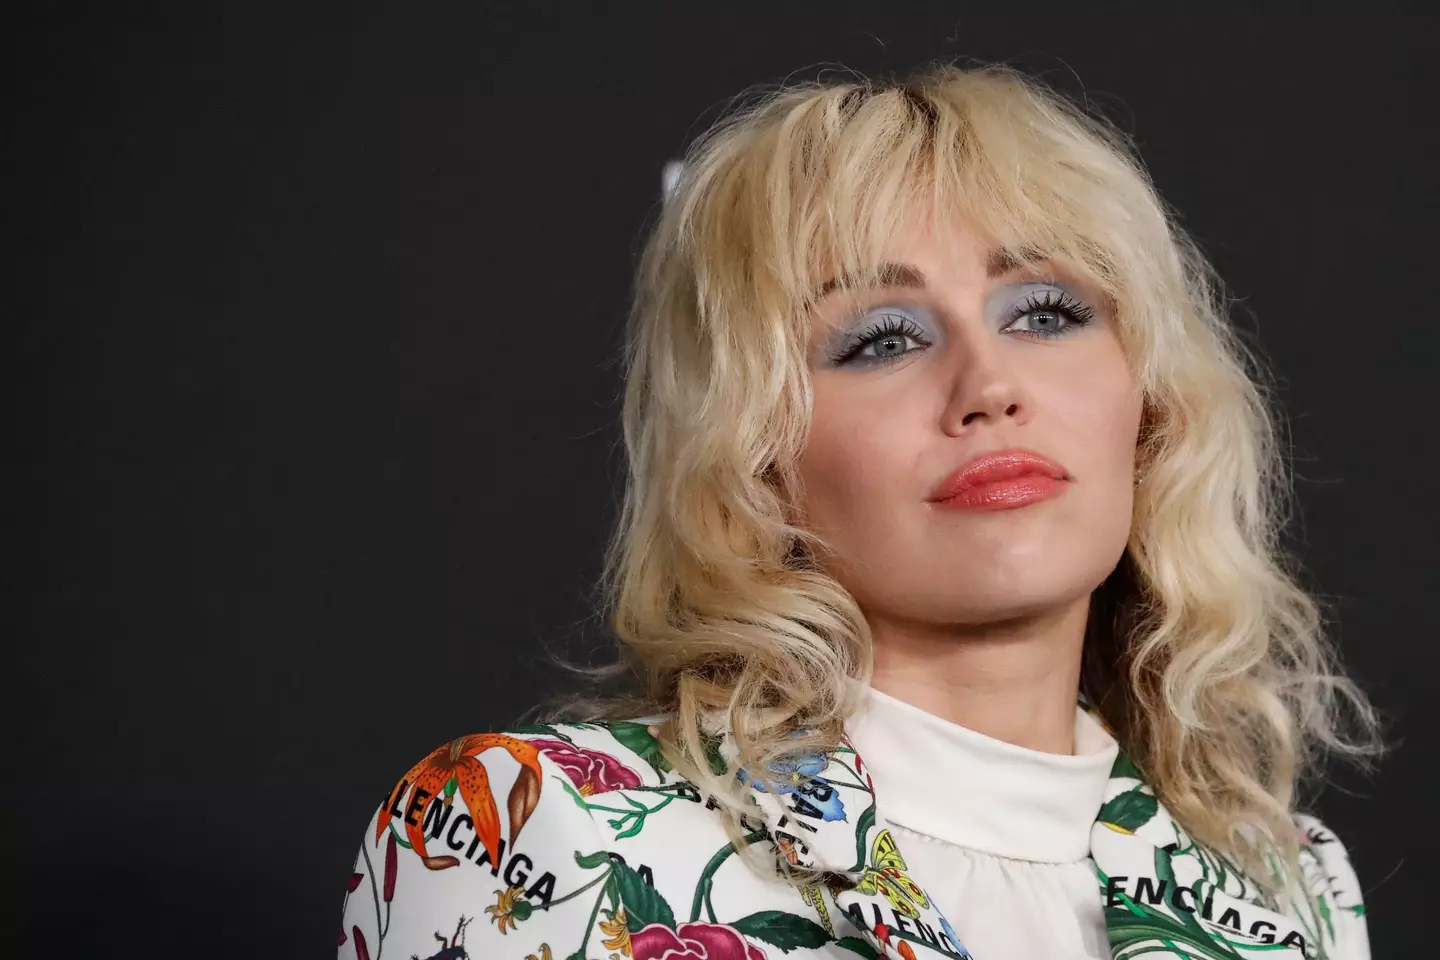 Miley Cyrus spoke on the possibility of playing Dolly Parton in a biopic.